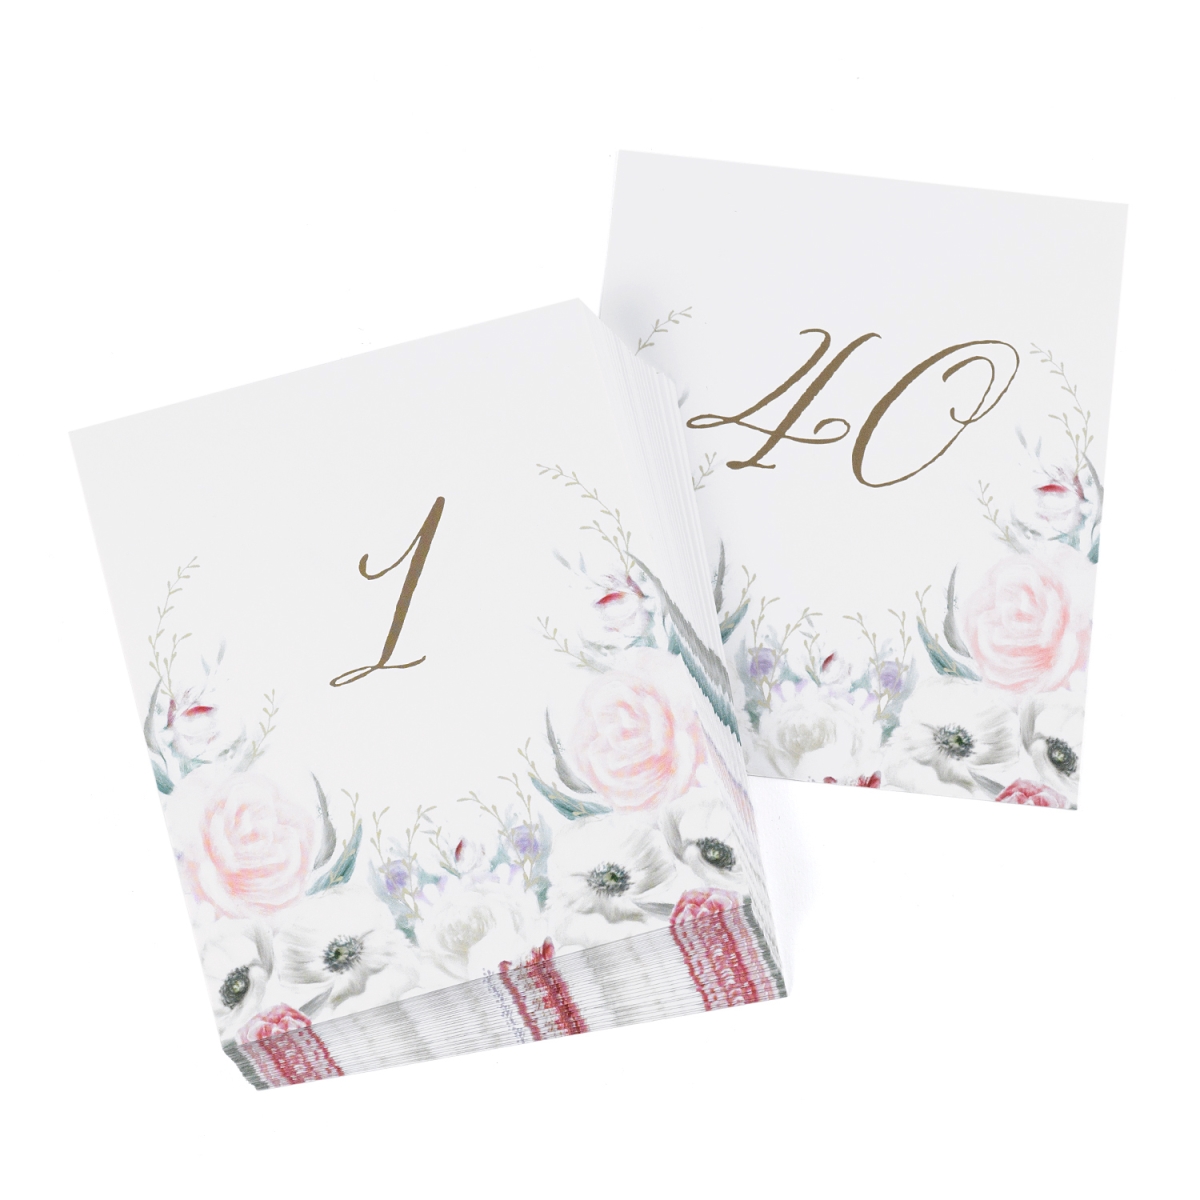 Picture of Hortense B. Hewitt 55181 Ethereal Floral Table Number - Pack of 40